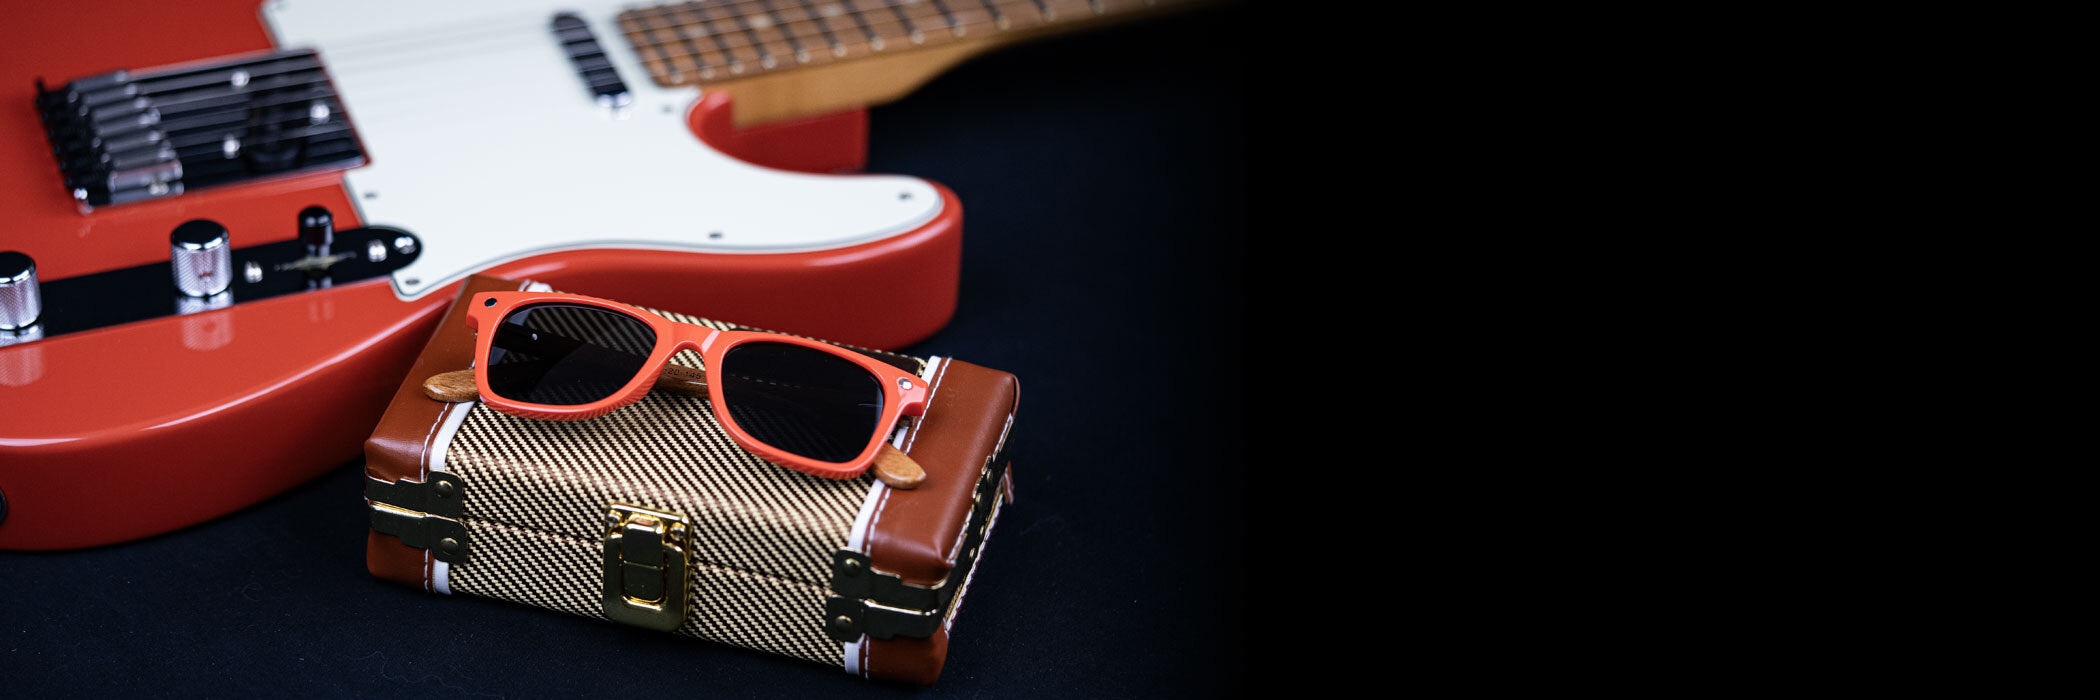 Fender sunglasses on a fender case next to a guitar